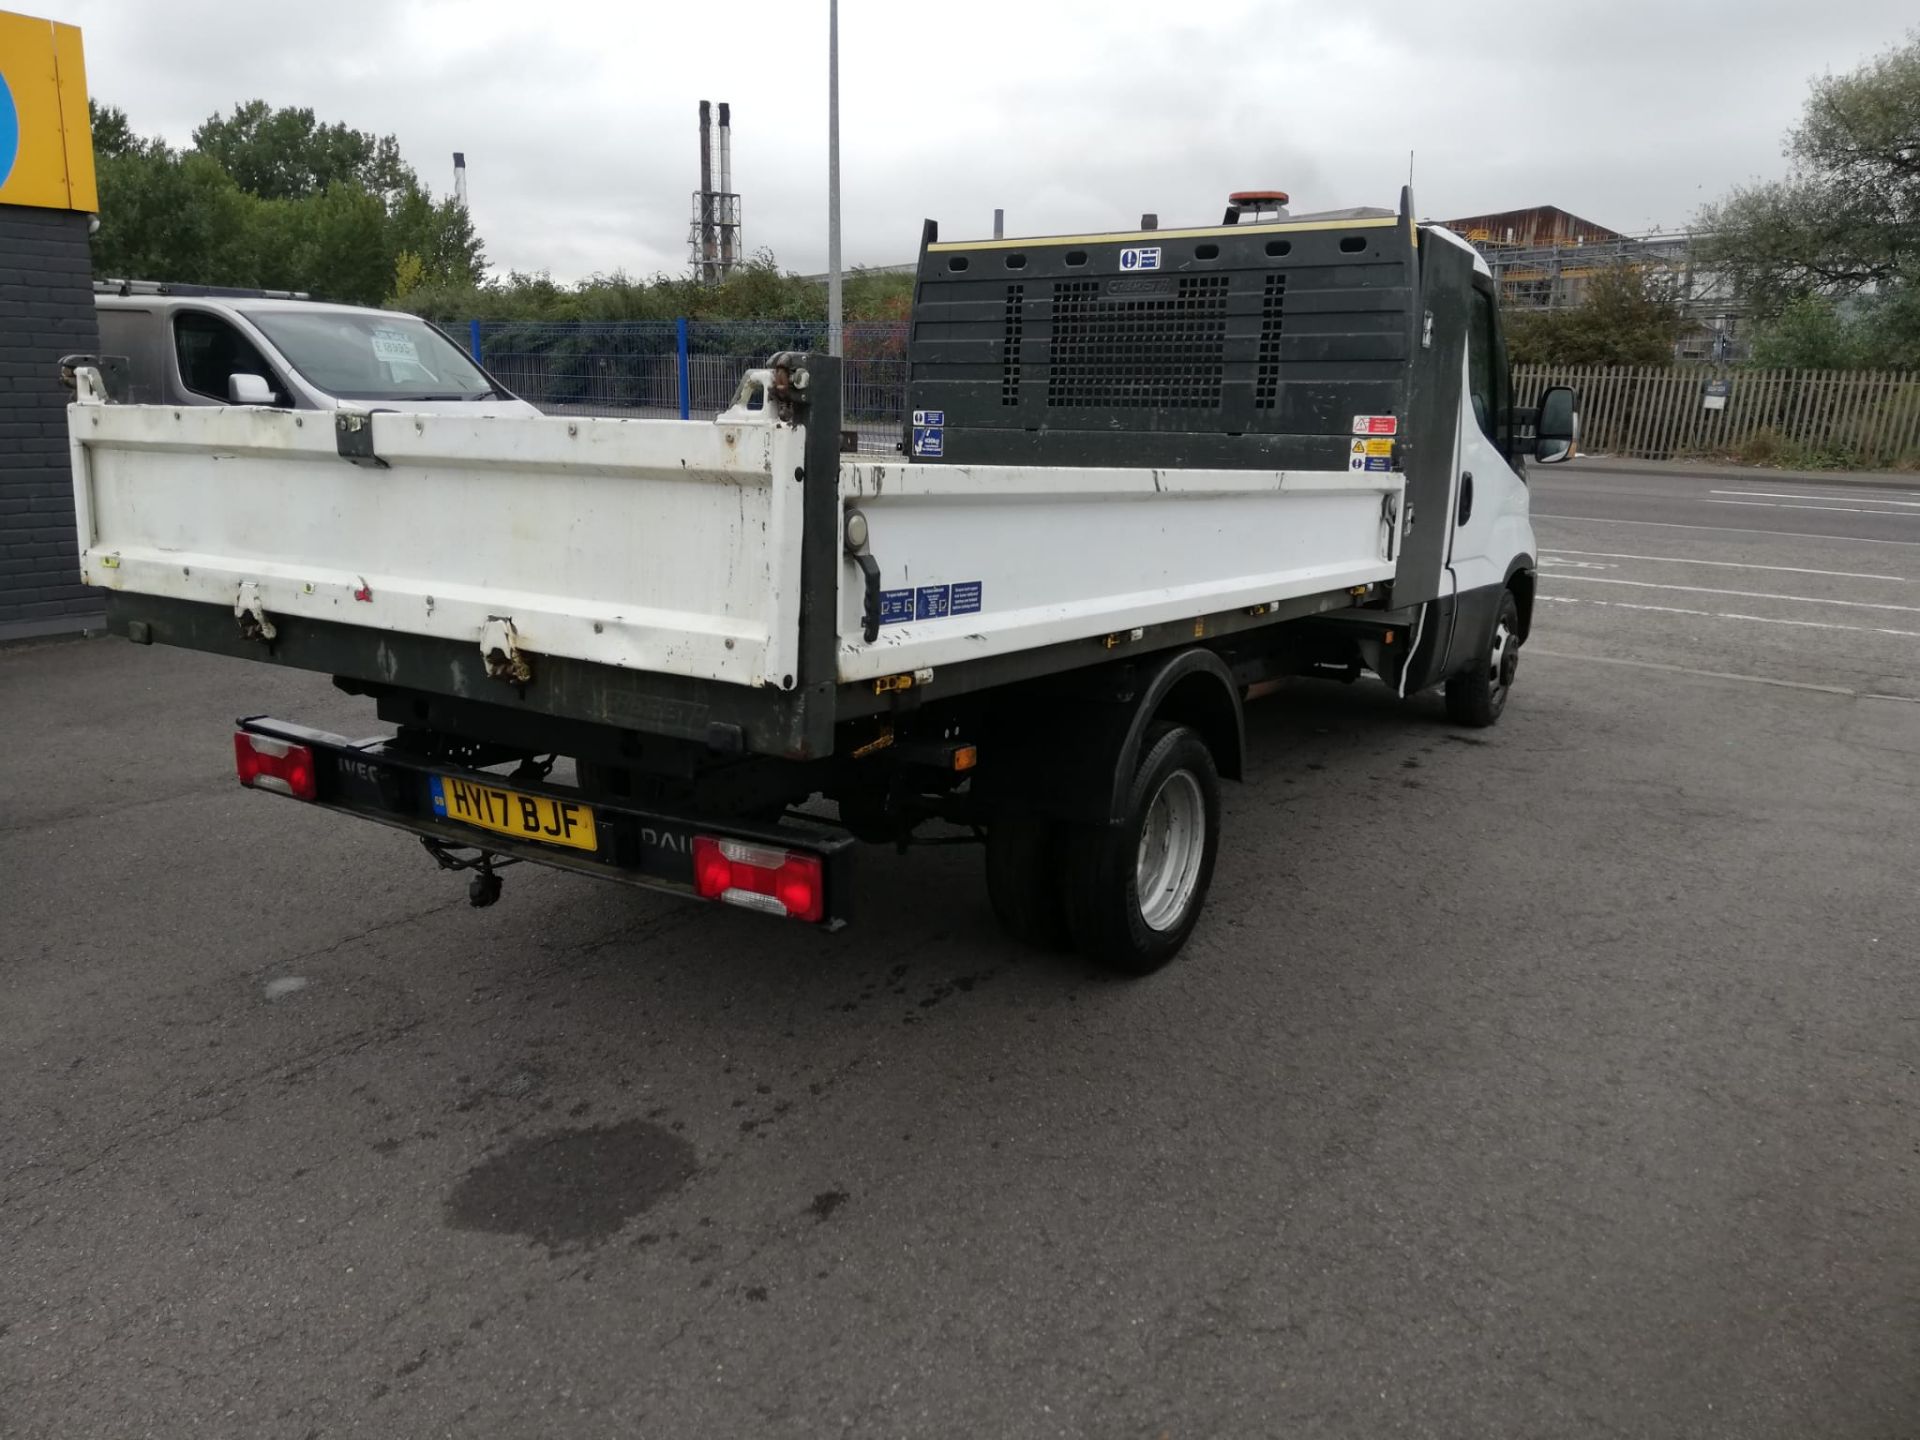 2017 IVECO DAILY 35C14 WHITE LWB TIPPER WITH STORAGE BOX, 88K MILES, 2.3 DIESEL ENGINE *PLUS VAT* - Image 7 of 15